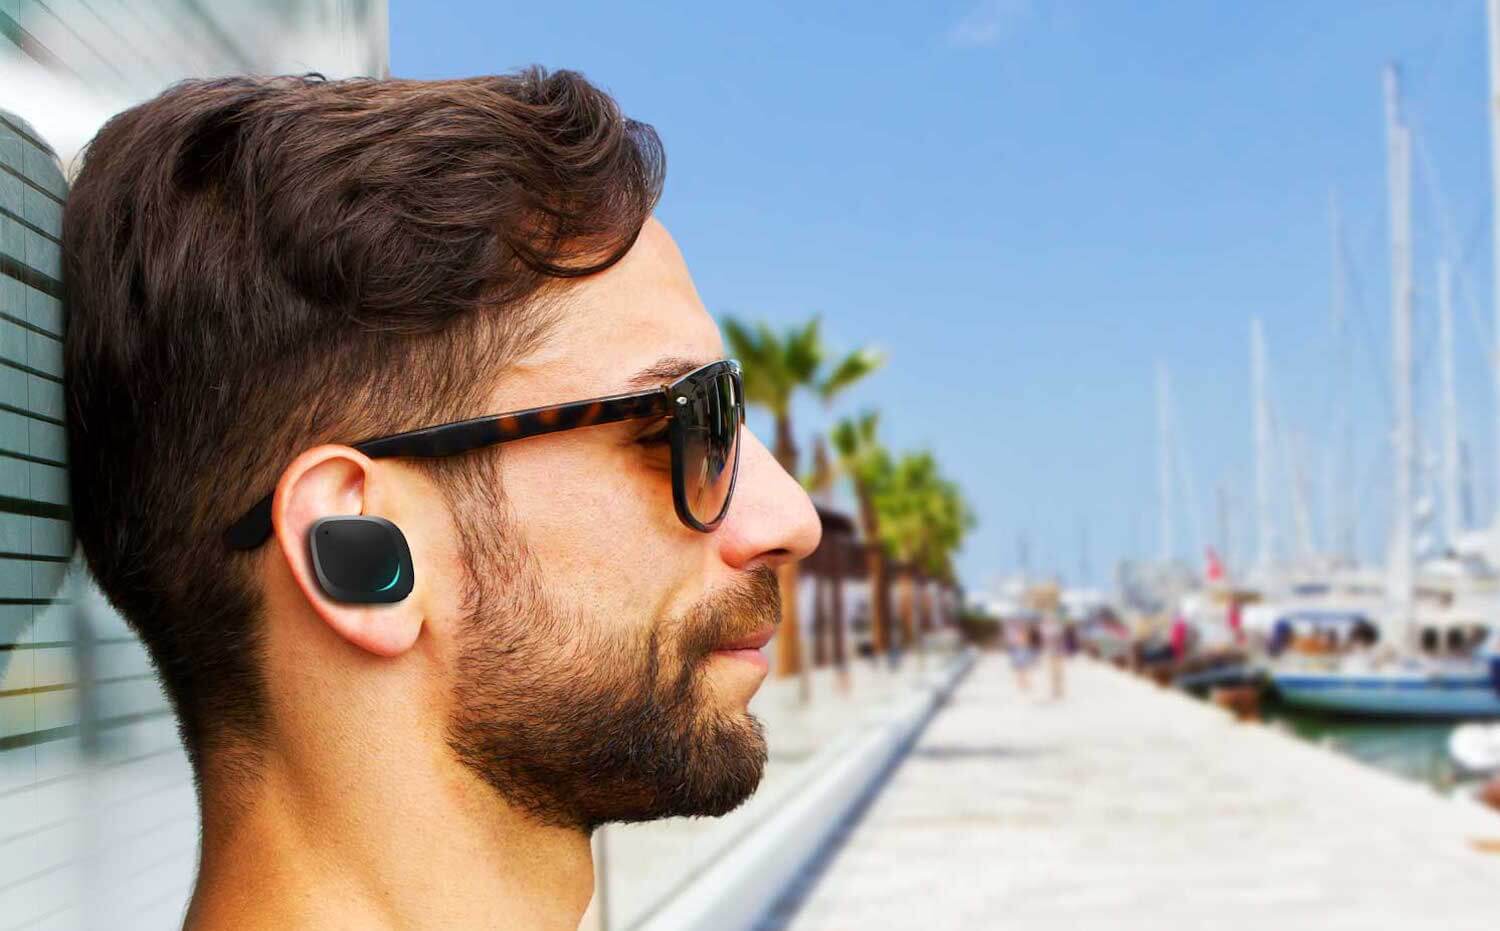 Best Bluetooth headsets of 2020